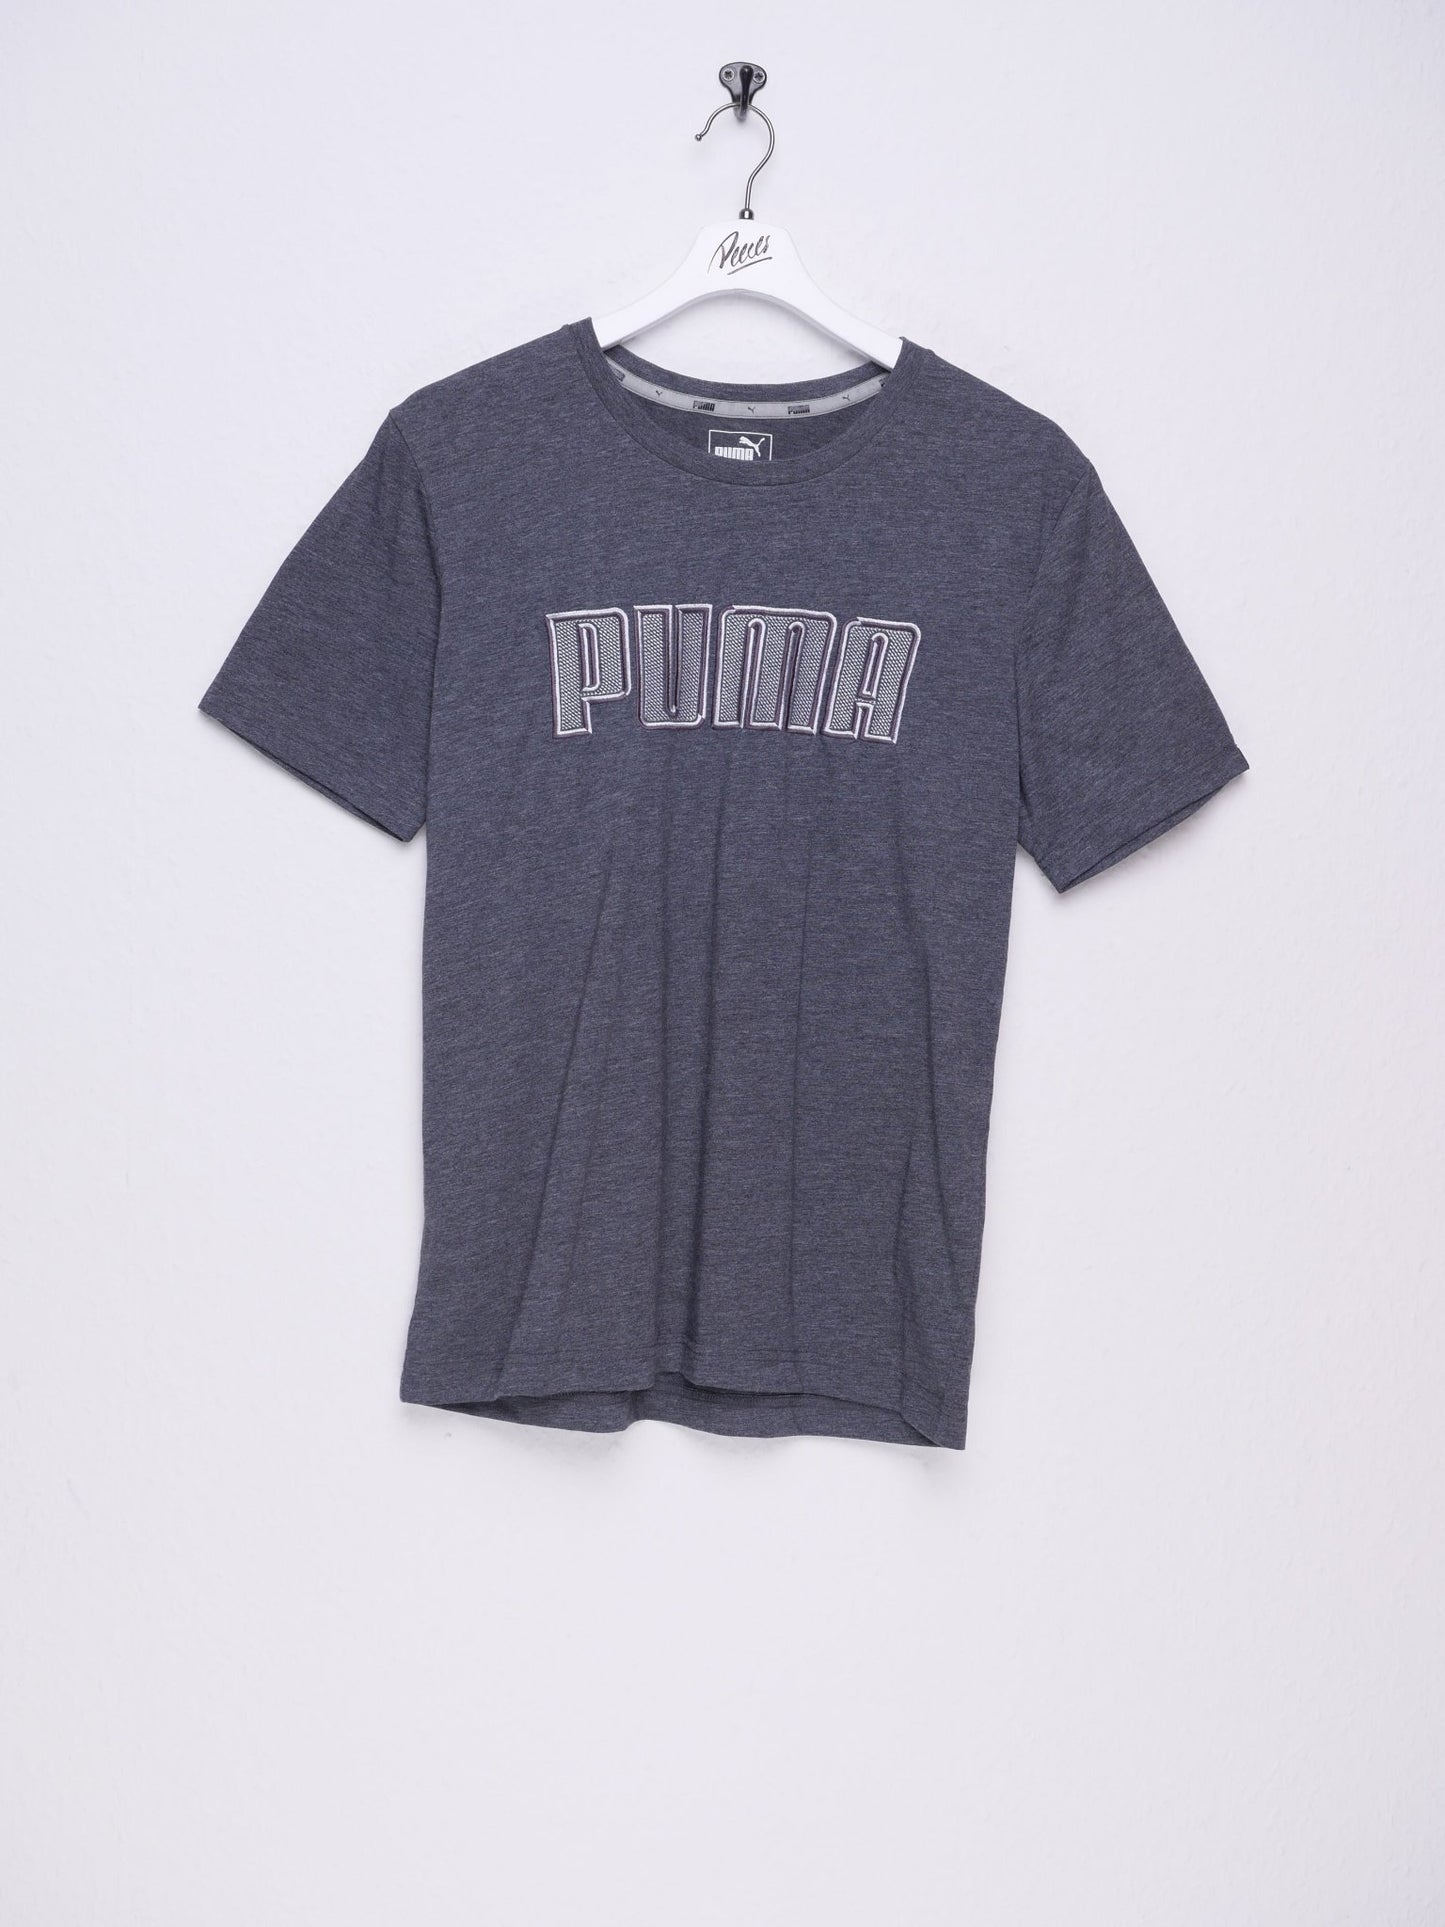 puma embroidered Spellout Vintage Shirt - Peeces